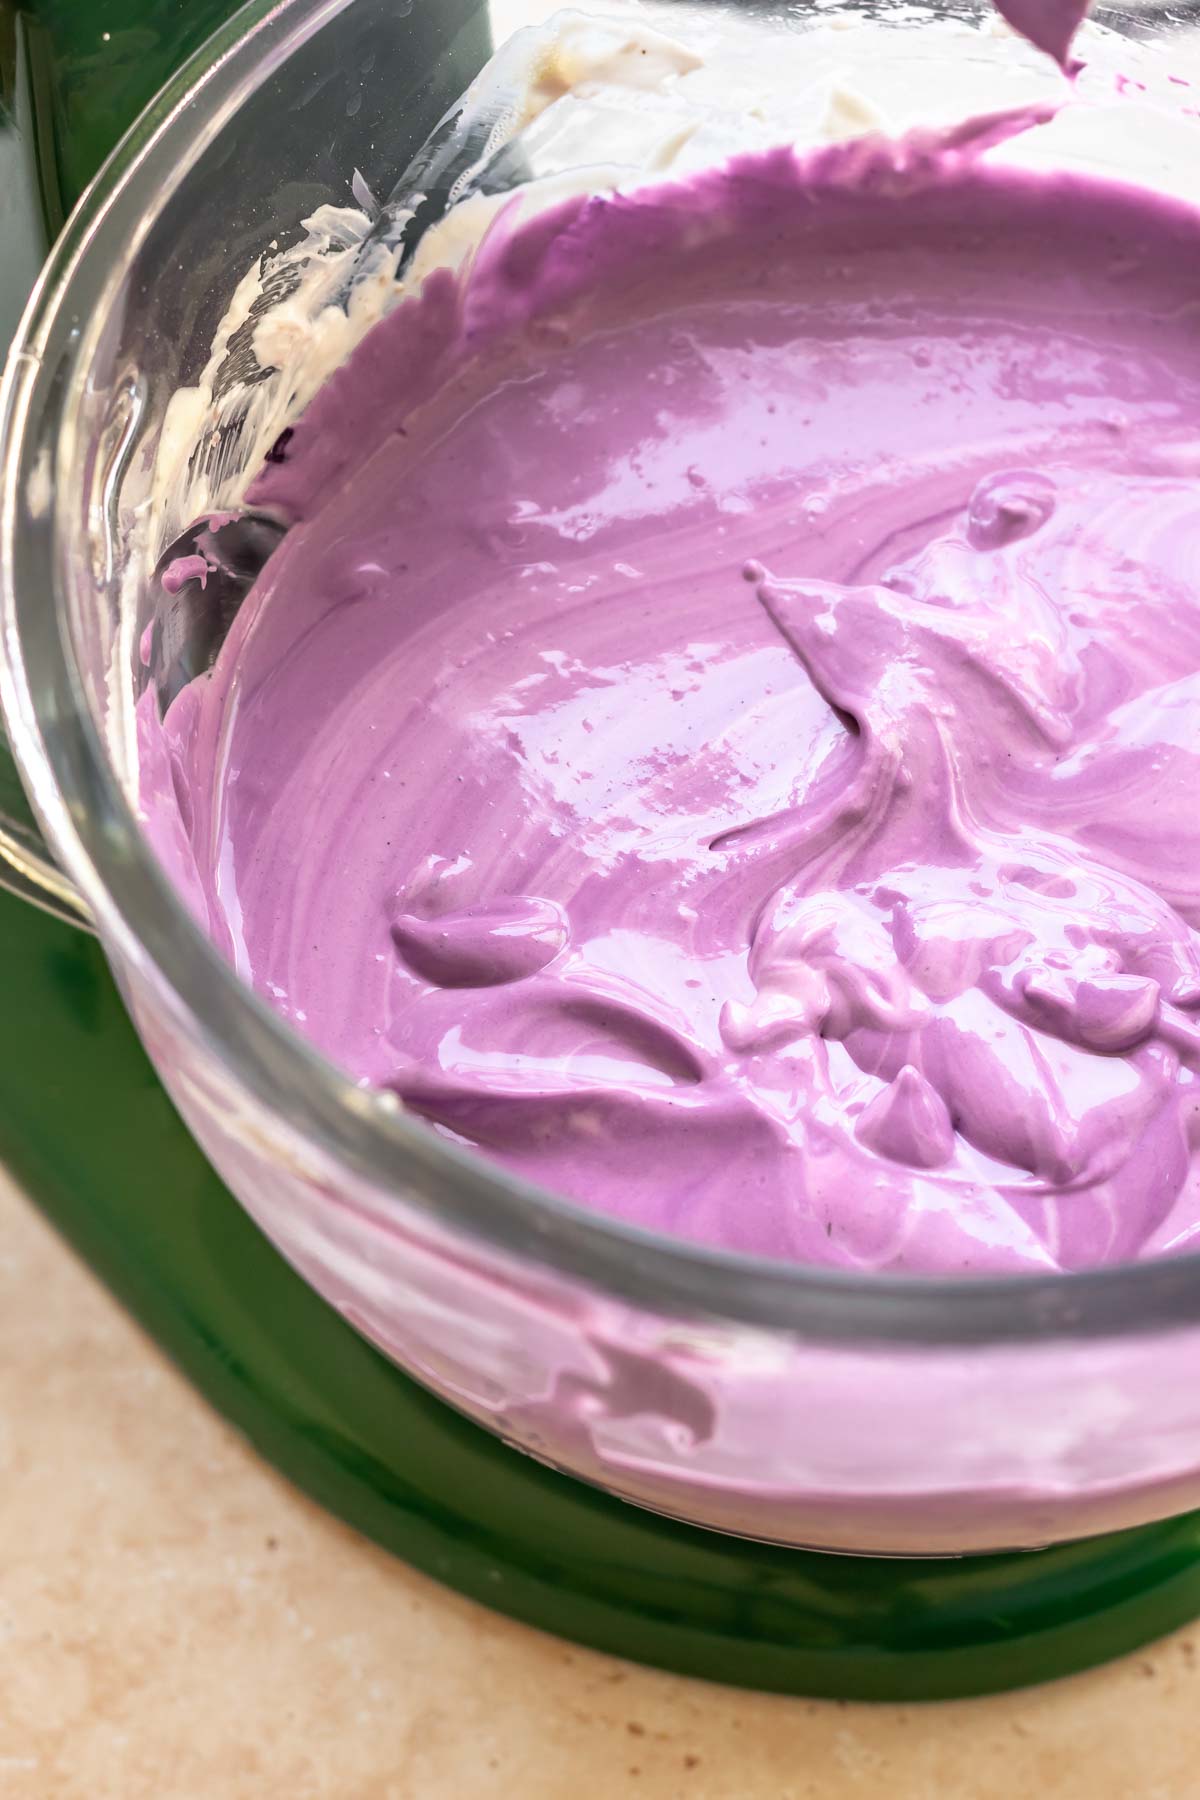 Purple use cheesecake batter in a stand mixer bowl.